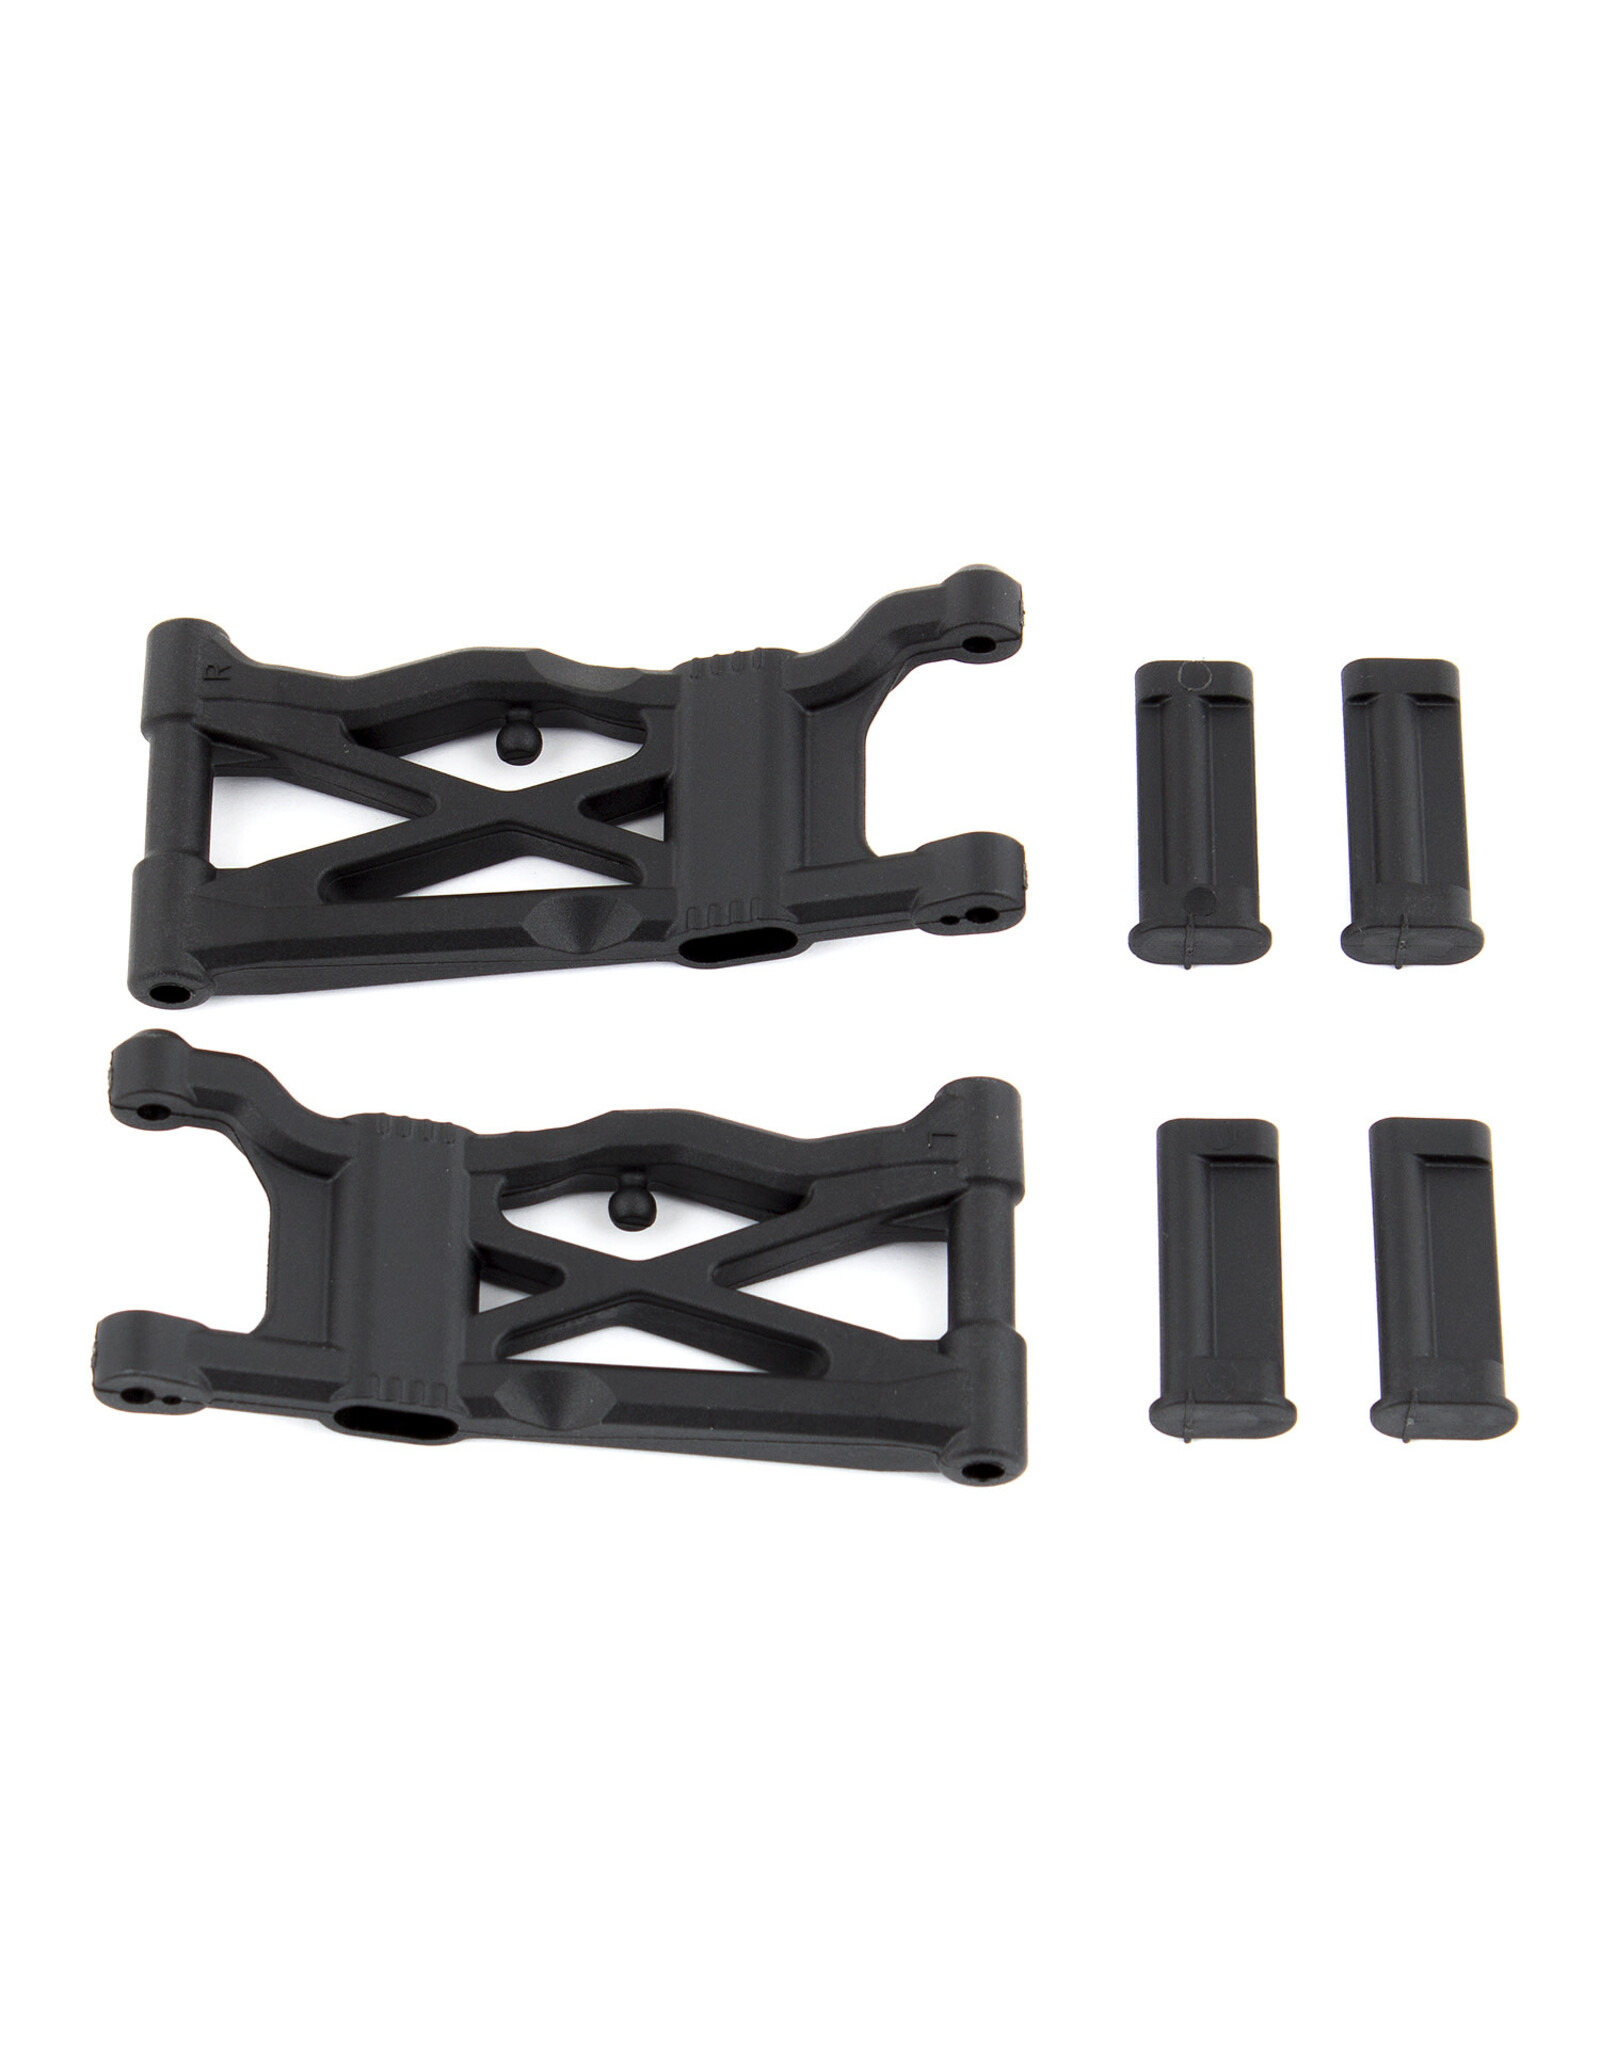 Team Associated Rear Suspension Arms, for B6.1